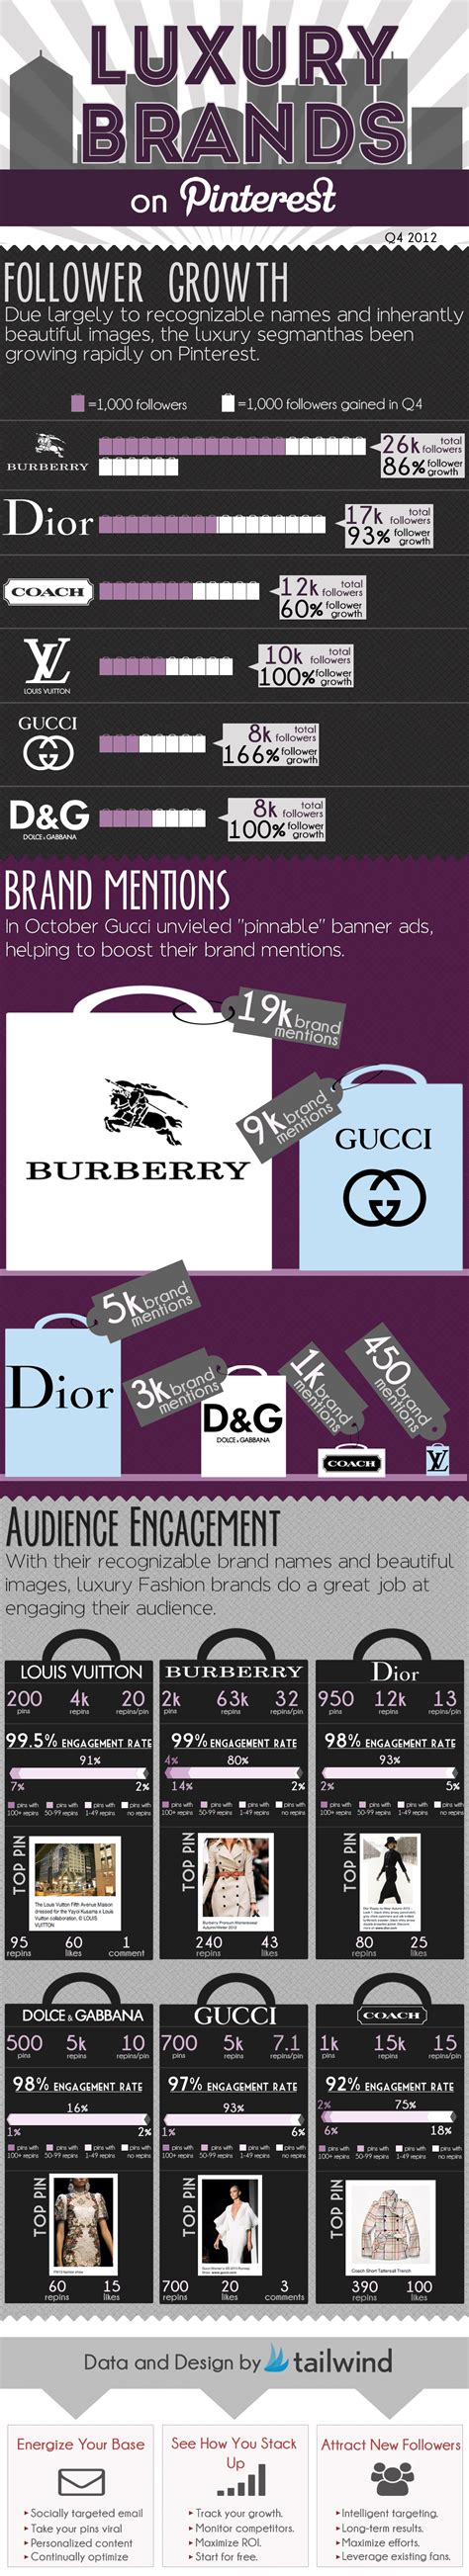 Top Pinterest Luxury Fashion Brands And Pins Infographic By Pinleague